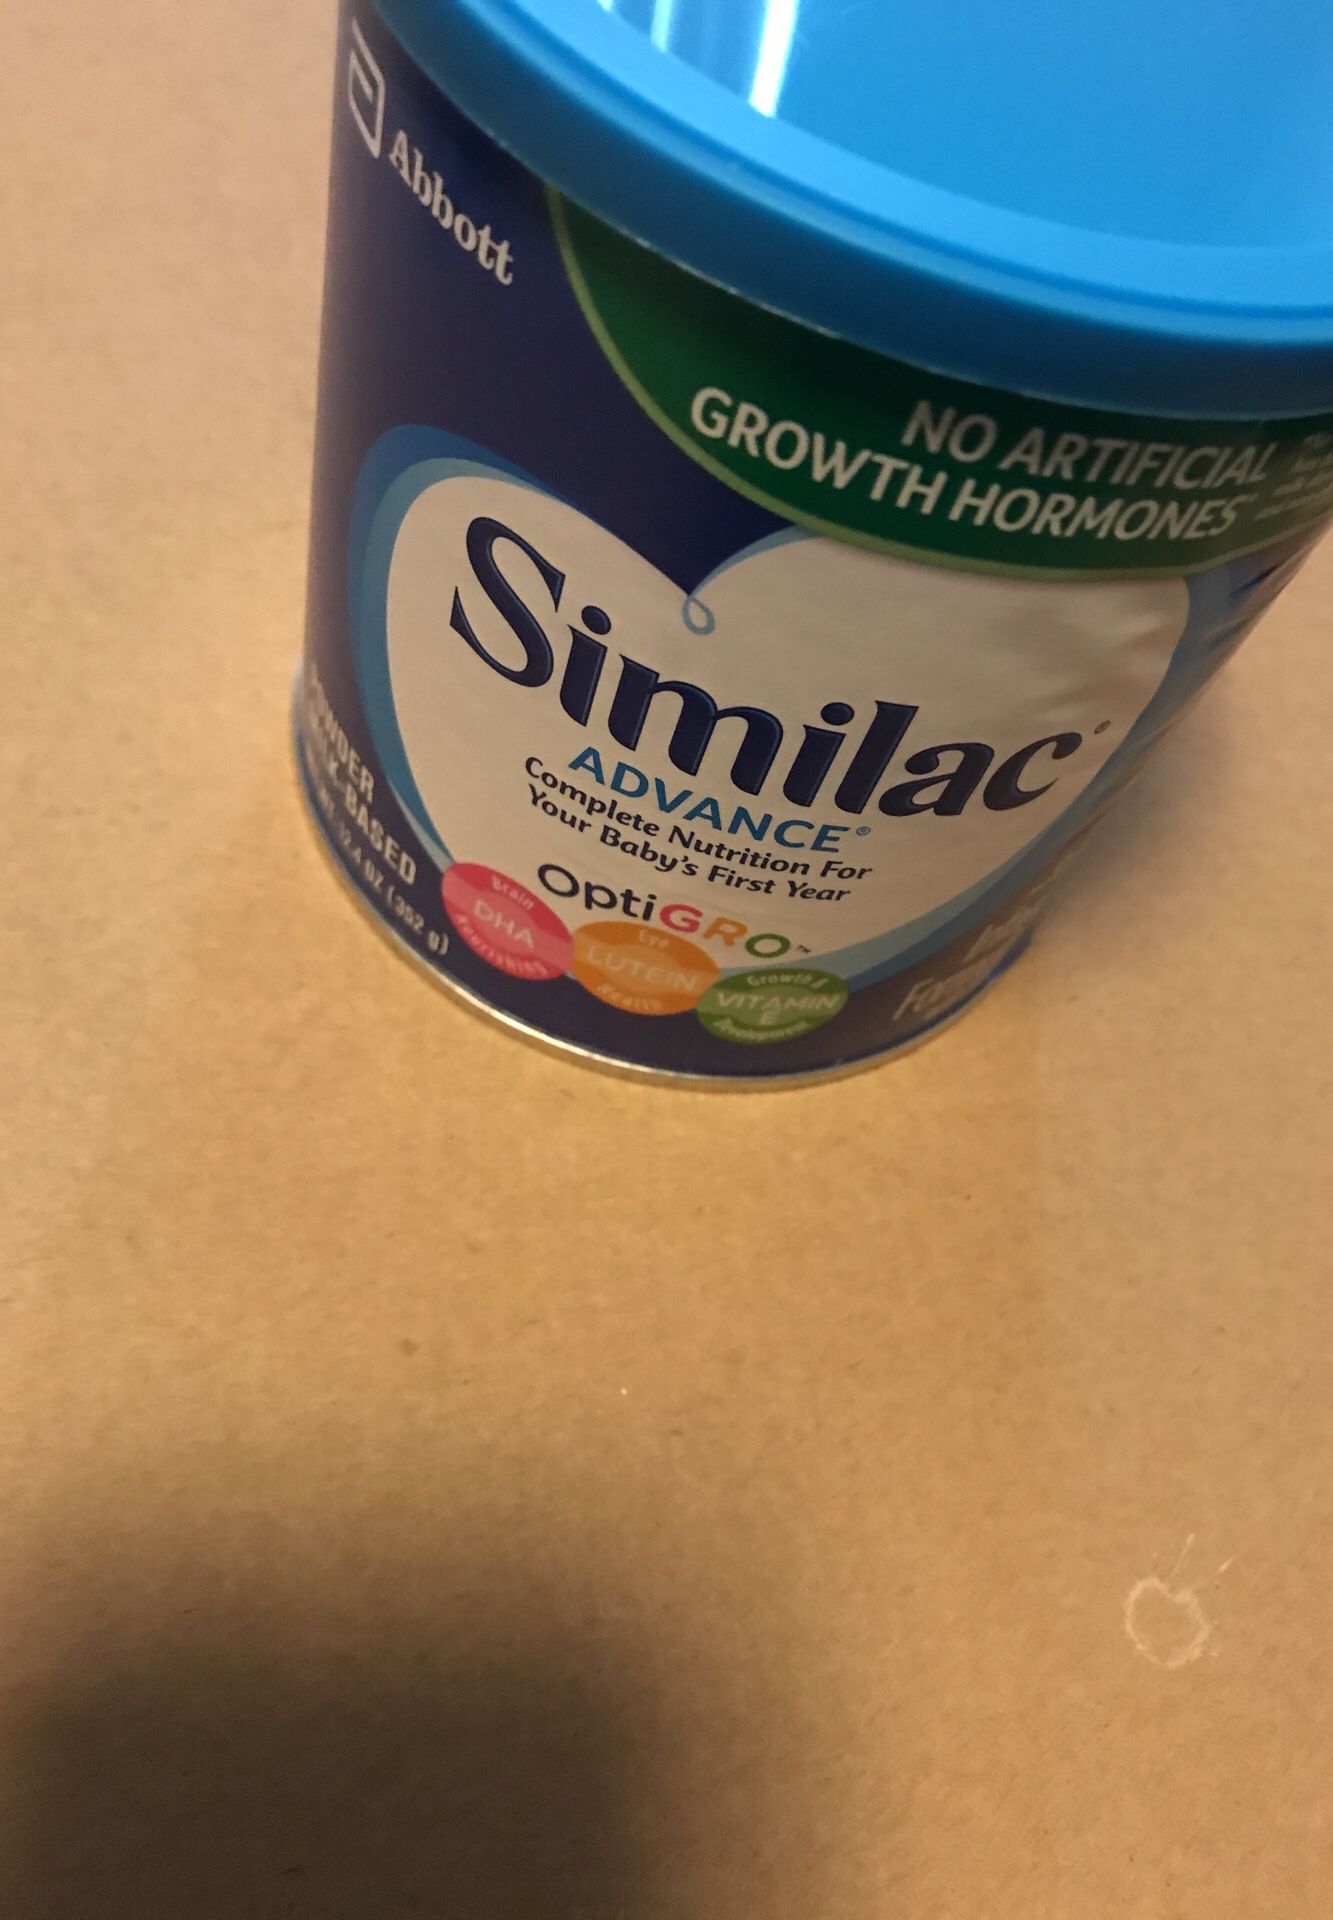 Similac NEW ONLY ONE CAN